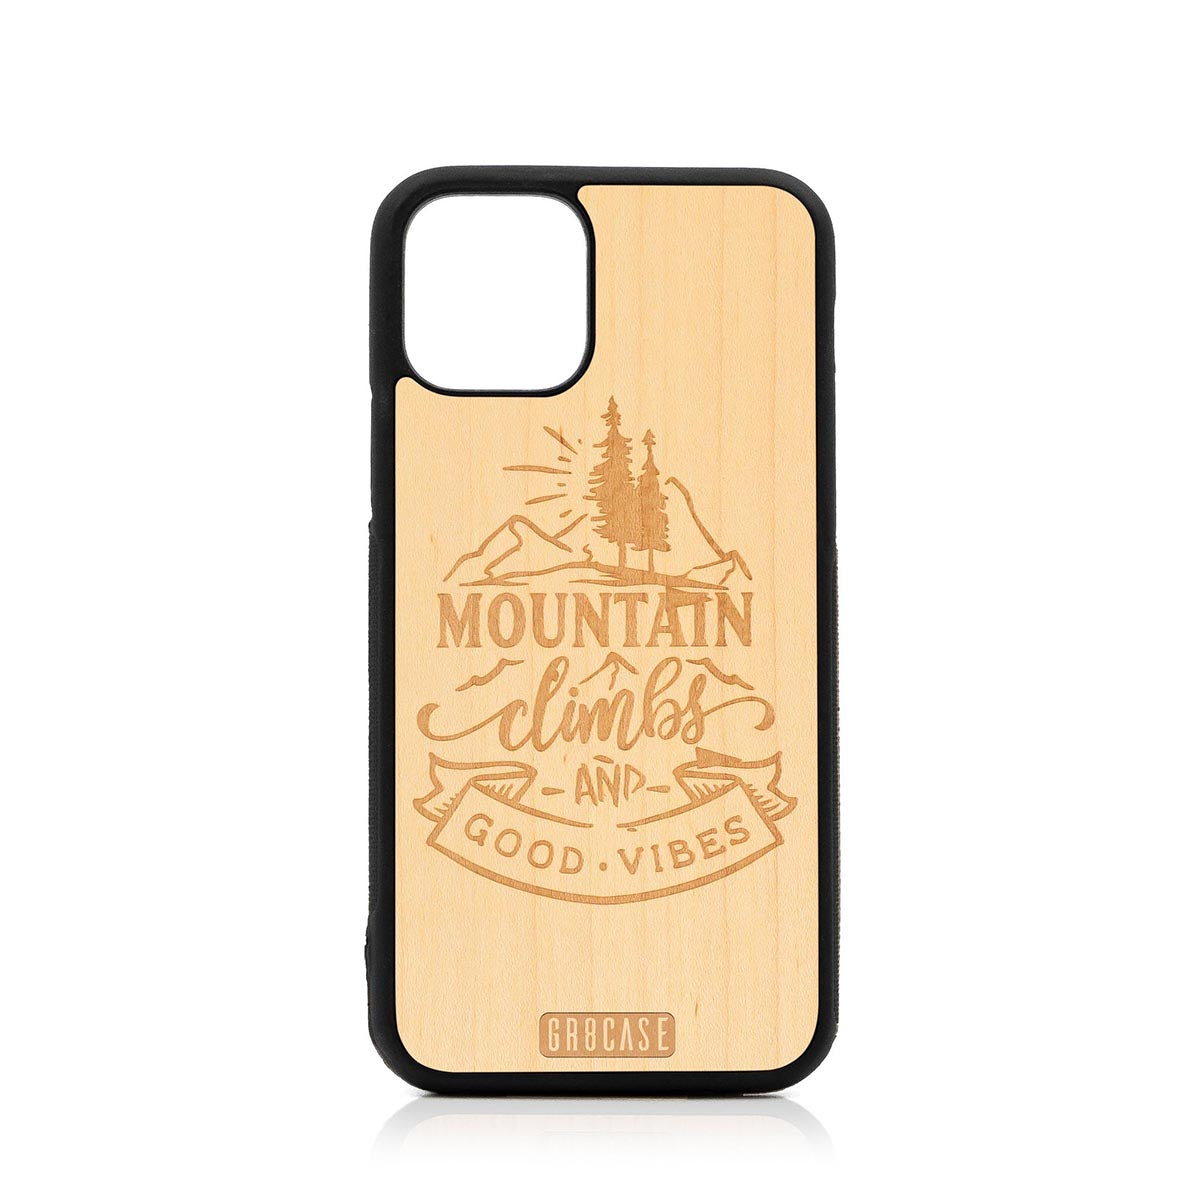 Mountain Climbs And Good Vibes Design Wood Case For iPhone 11 Pro by GR8CASE